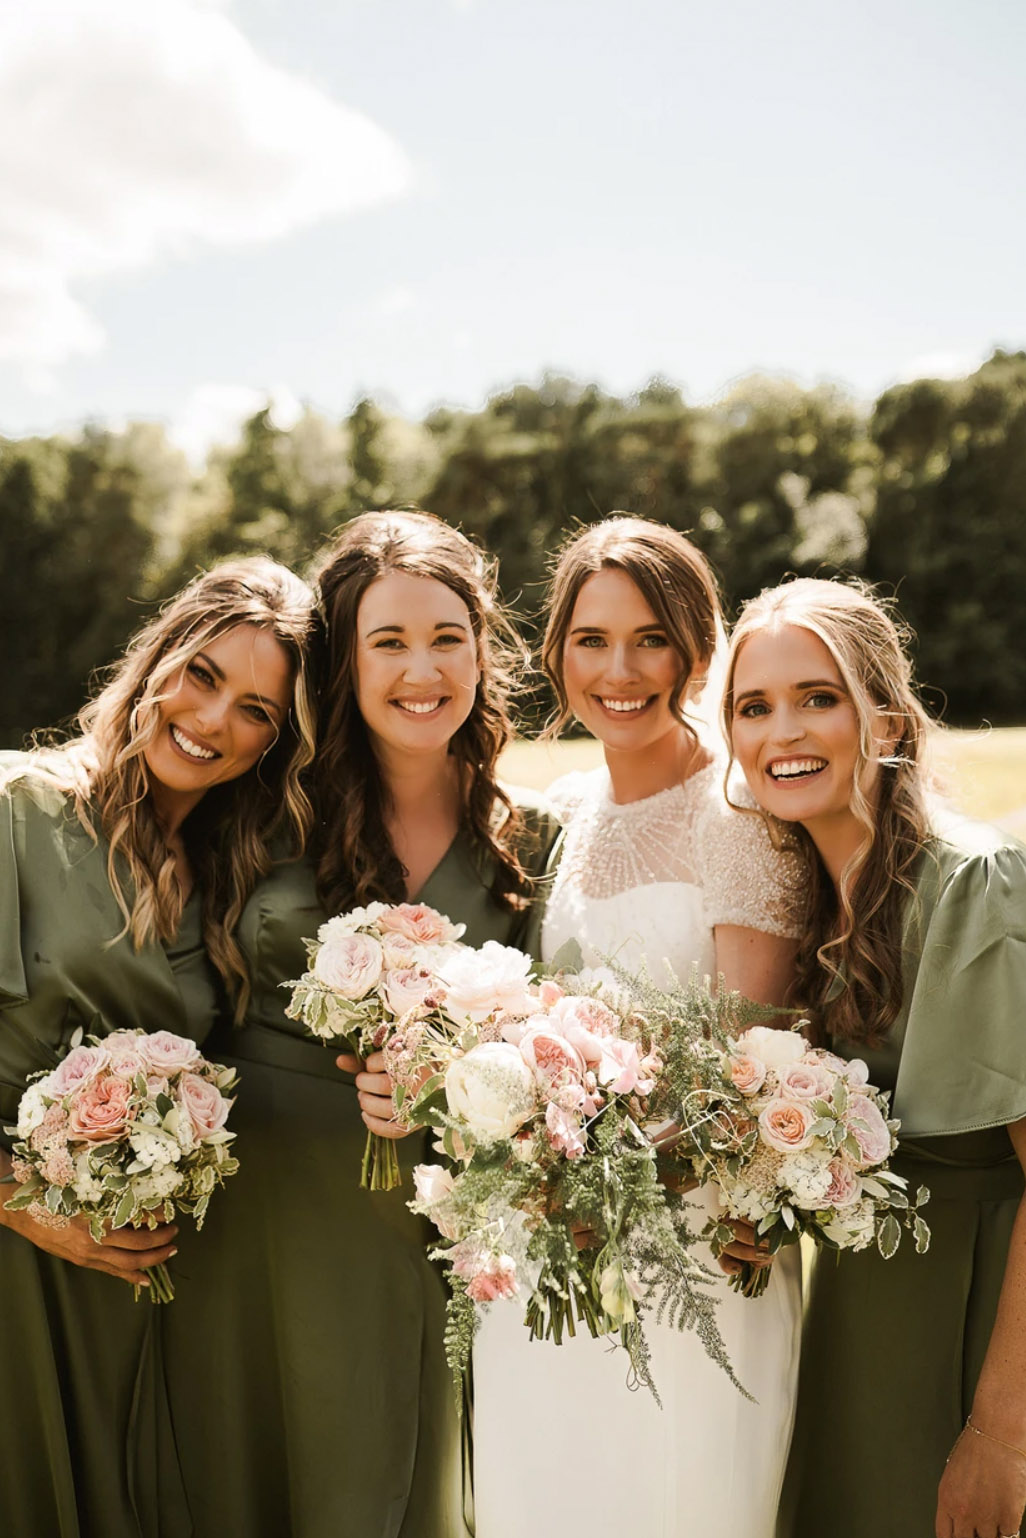 Bridesmaids in olive green wedding dresses - Gabriela's Photography and Film, Sheffield South Yorkshire wedding photographer and videographer